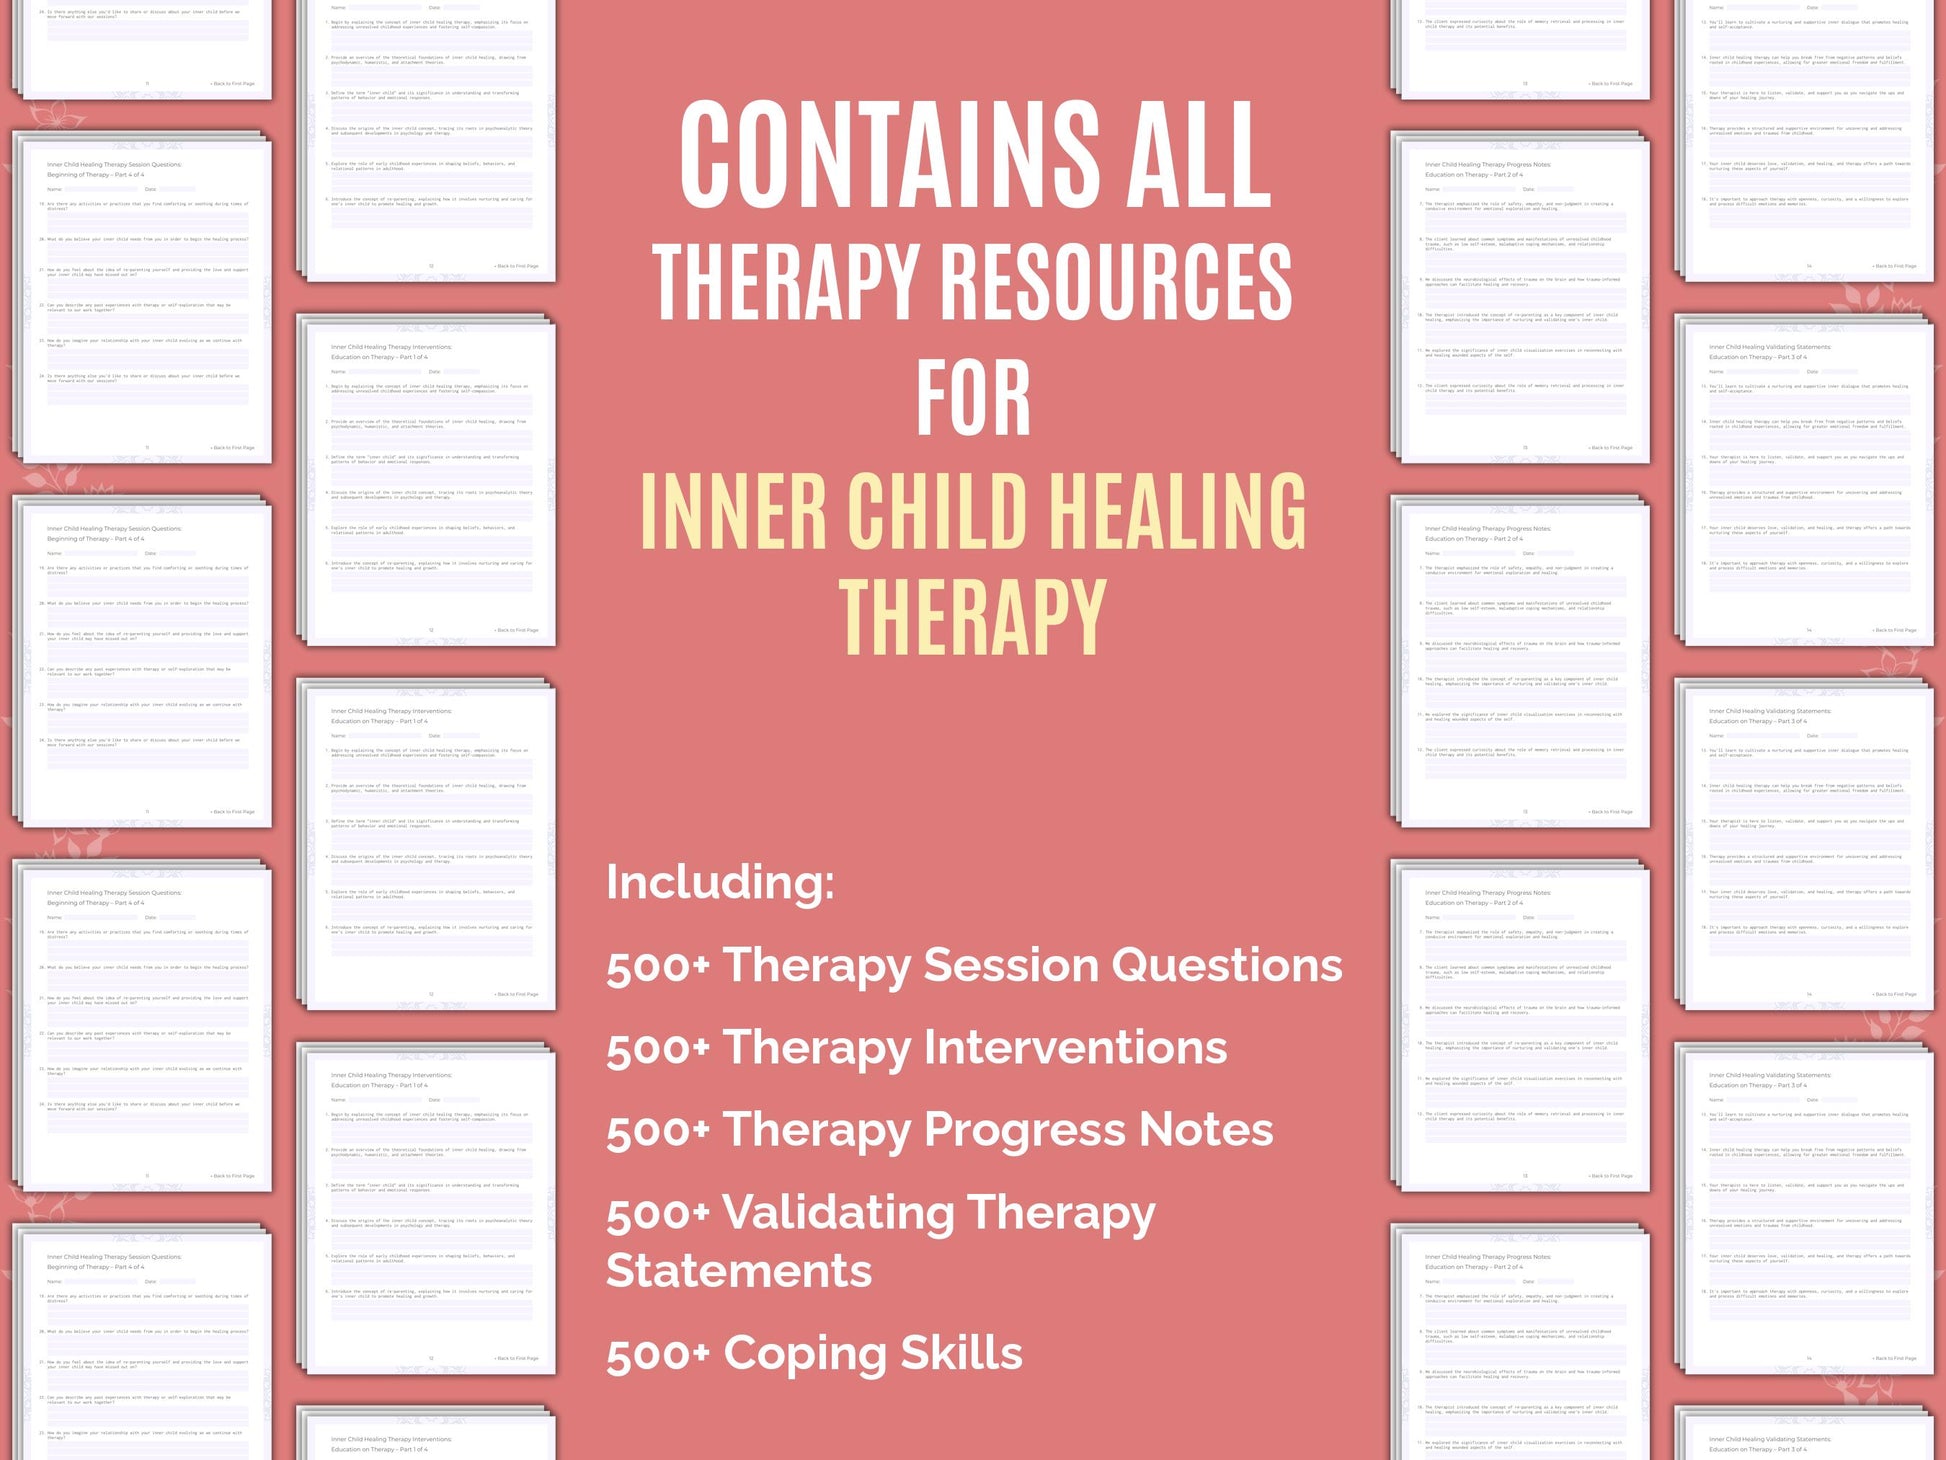 Validating Therapy Statements Resource